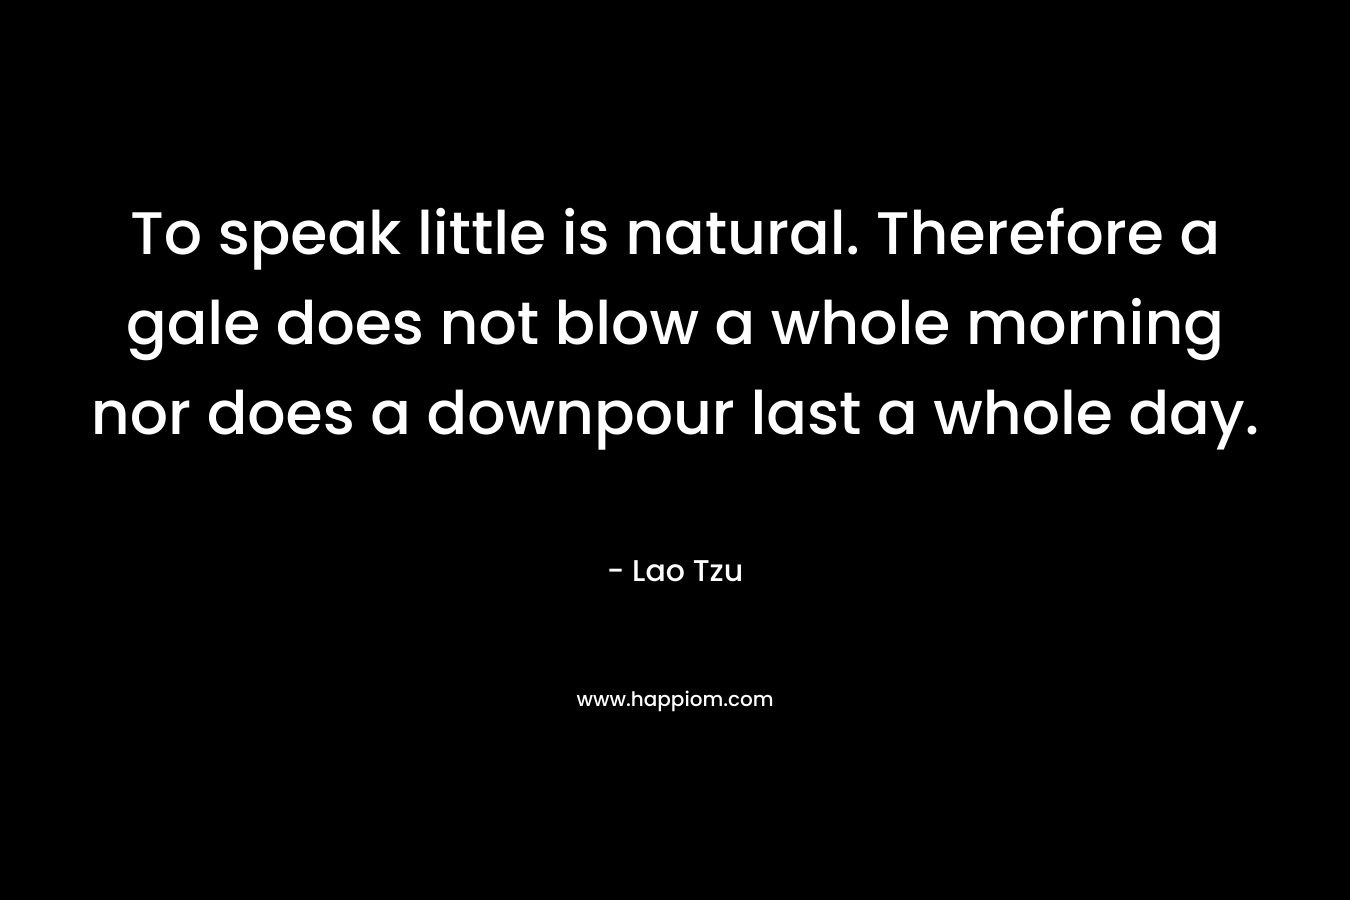 To speak little is natural. Therefore a gale does not blow a whole morning nor does a downpour last a whole day. – Lao Tzu